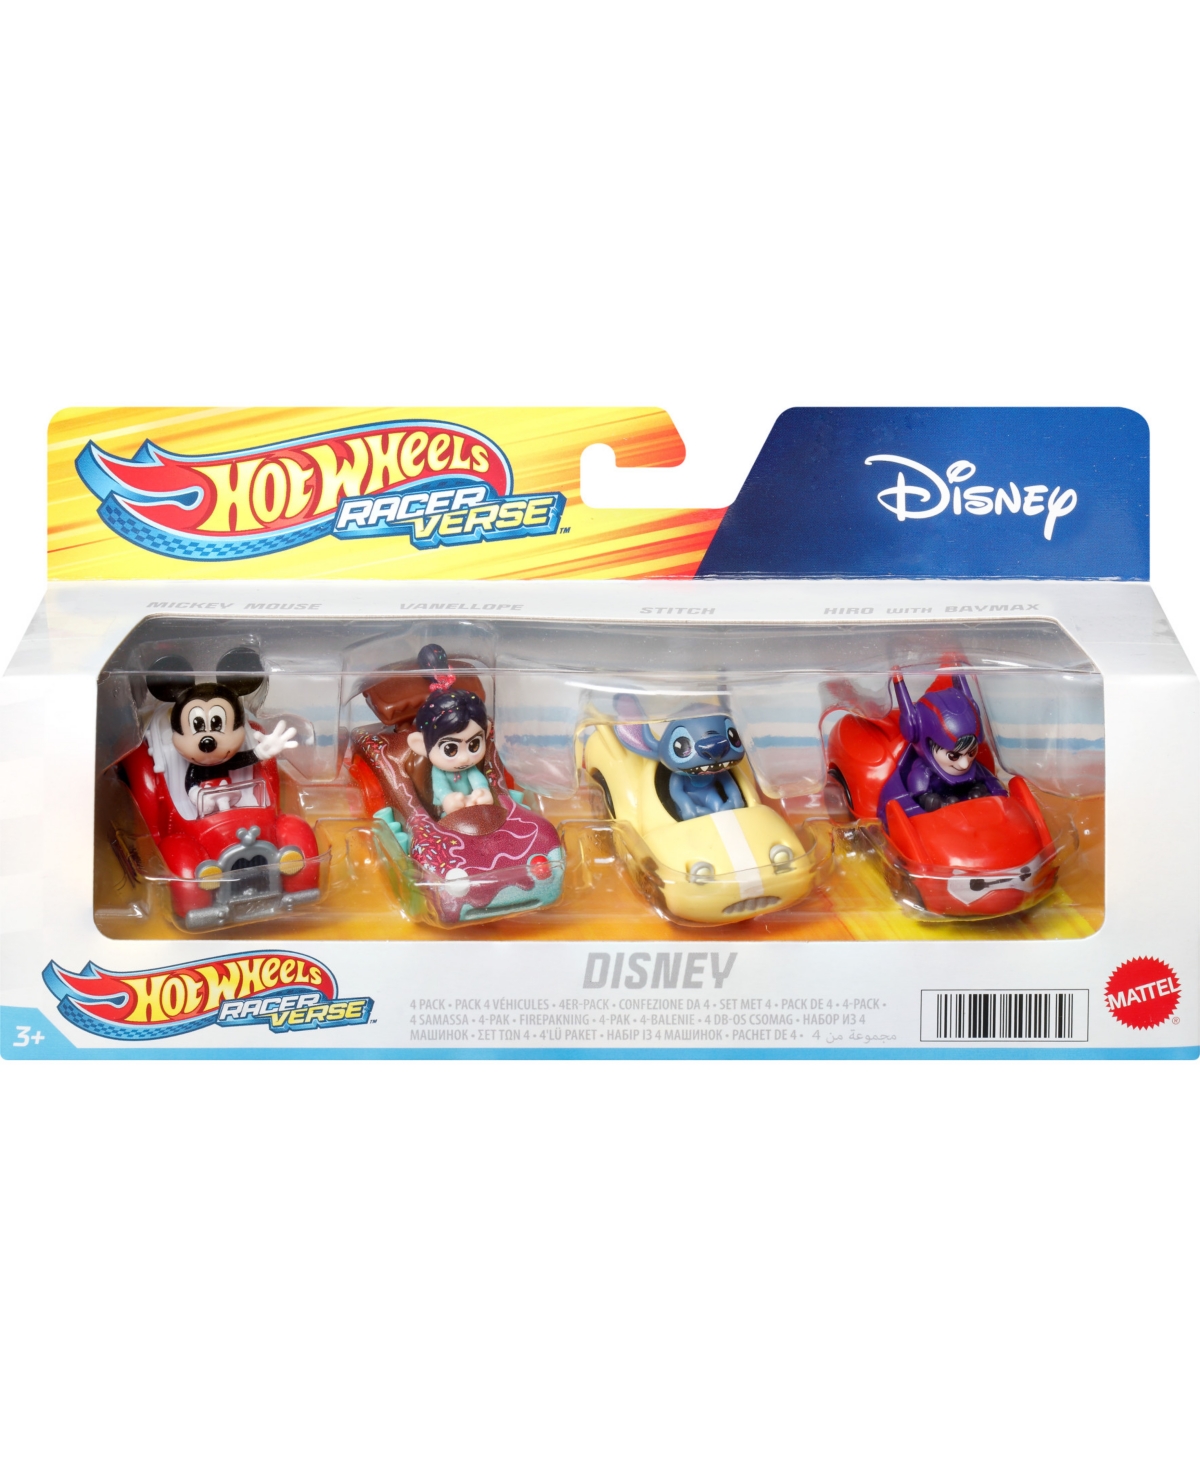 Shop Hot Wheels Racerverse Set Of 4 Die-cast  Cars With Disney Characters As Drivers In Multi-color